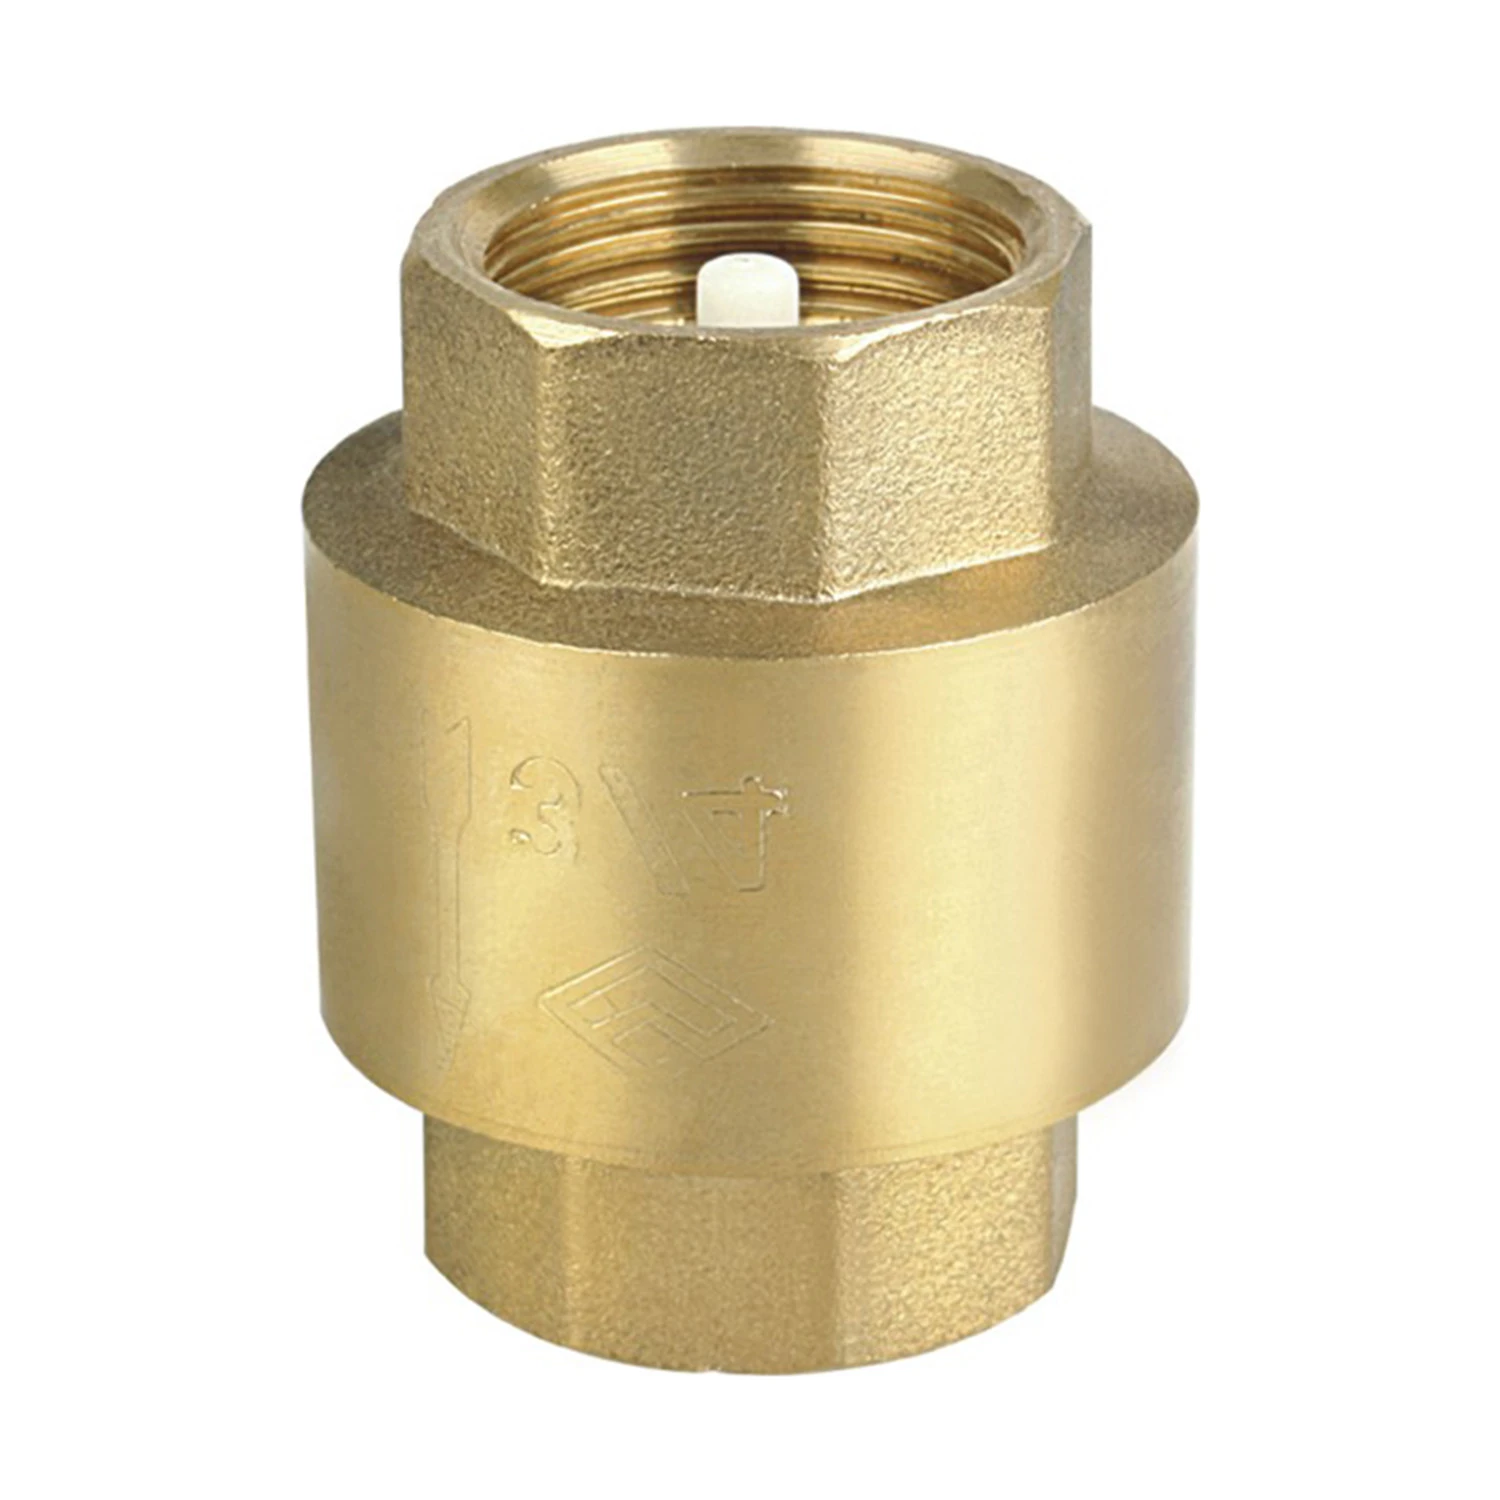 Hot Selling Cheap Resistant Bronze Swing Check Manufacturer Price Brass Valve Ball